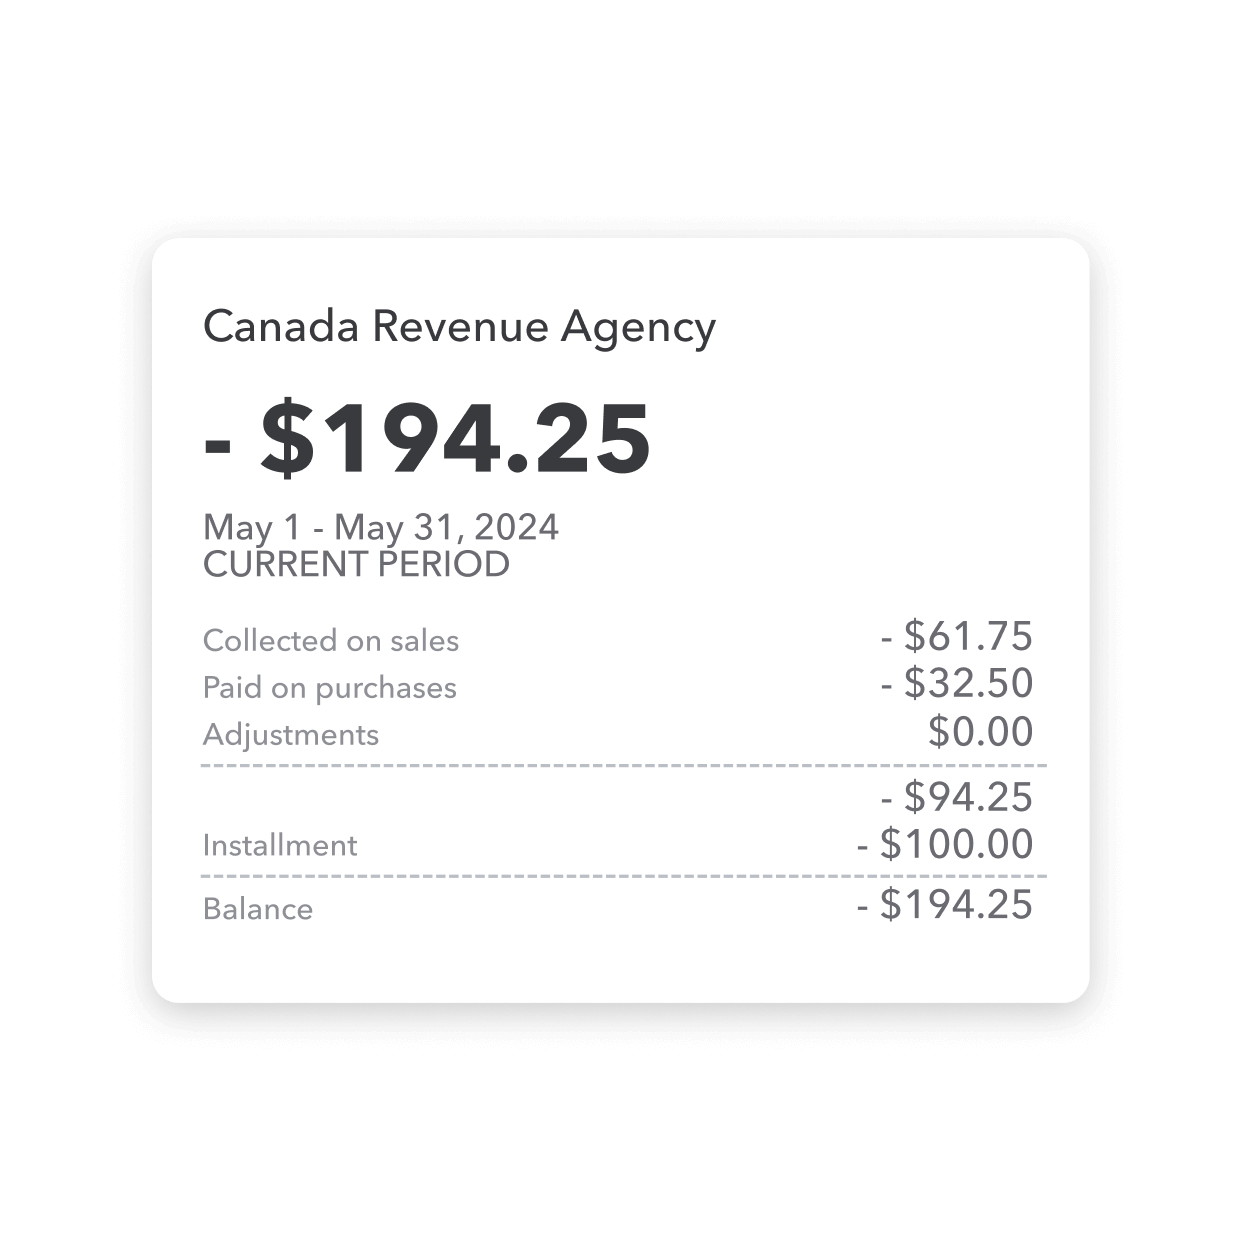 CRA report for May 1 to May 31, showing amounts collected on sales, paid on purchases, and adjustments.